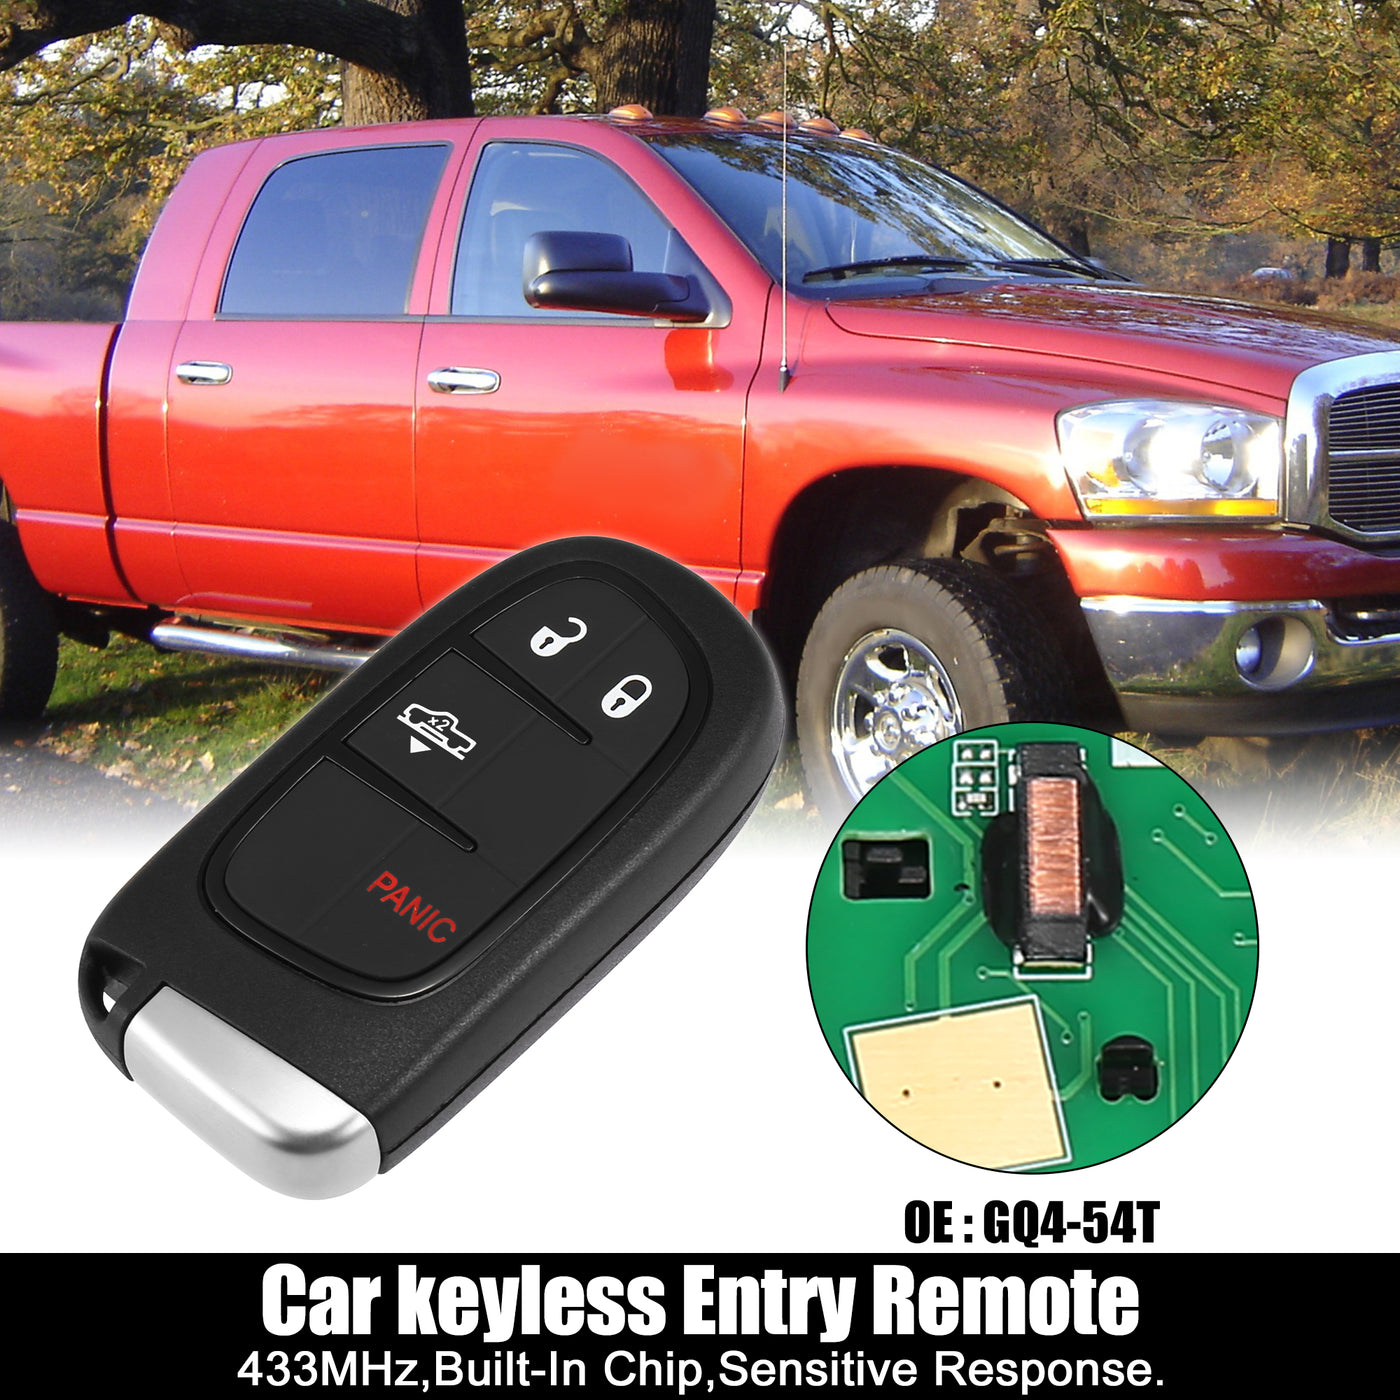 X AUTOHAUX GQ4-54T Replacement Smart Proximit Keyless Entry Remote Key Fob Alarm for Dodge for Ram 1500 2500 3500 Air Suspension Truck 2013-2018 4 Buttons 433MHz 46 Chip 1470A-35T 68159656